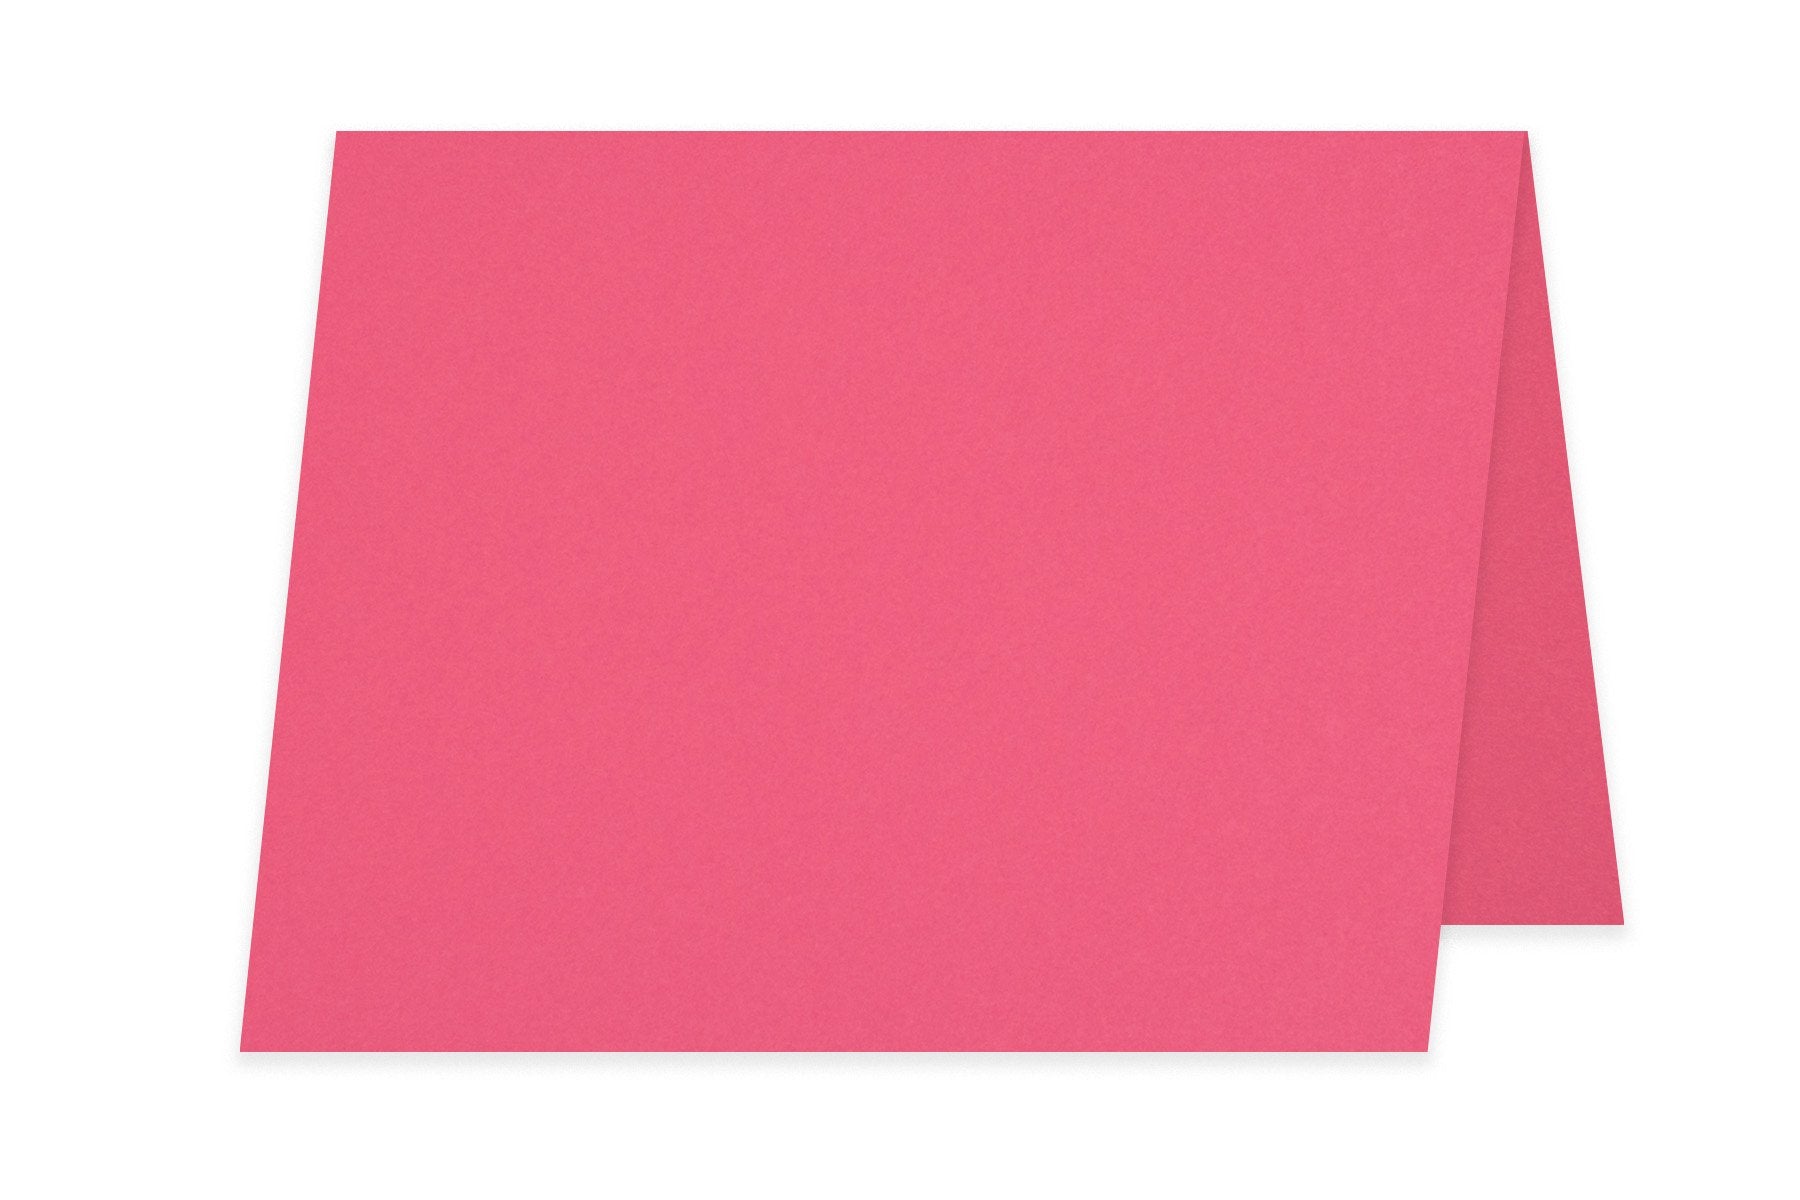 Premium Vellum Folded A1 Discount Card Stock for DIY thank you cards -  CutCardStock